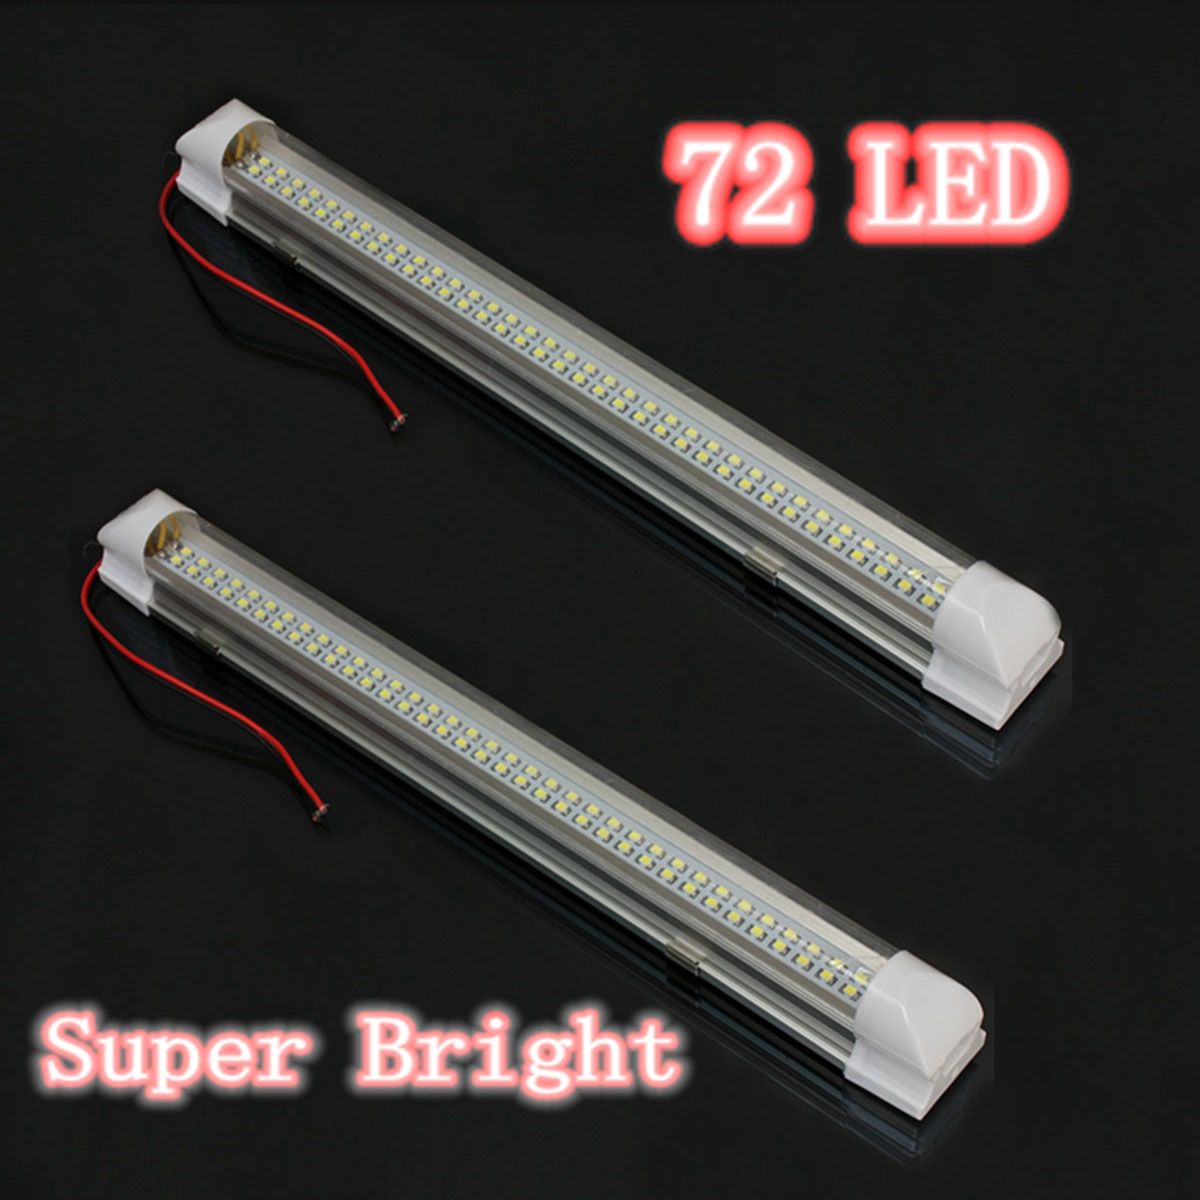 Universal-Interior-34cm-LED-Light-Strip-Lamp-White-2Pcs-with-ONOFF-Switch-for-Car-Auto-Caravan-Bus-1406588